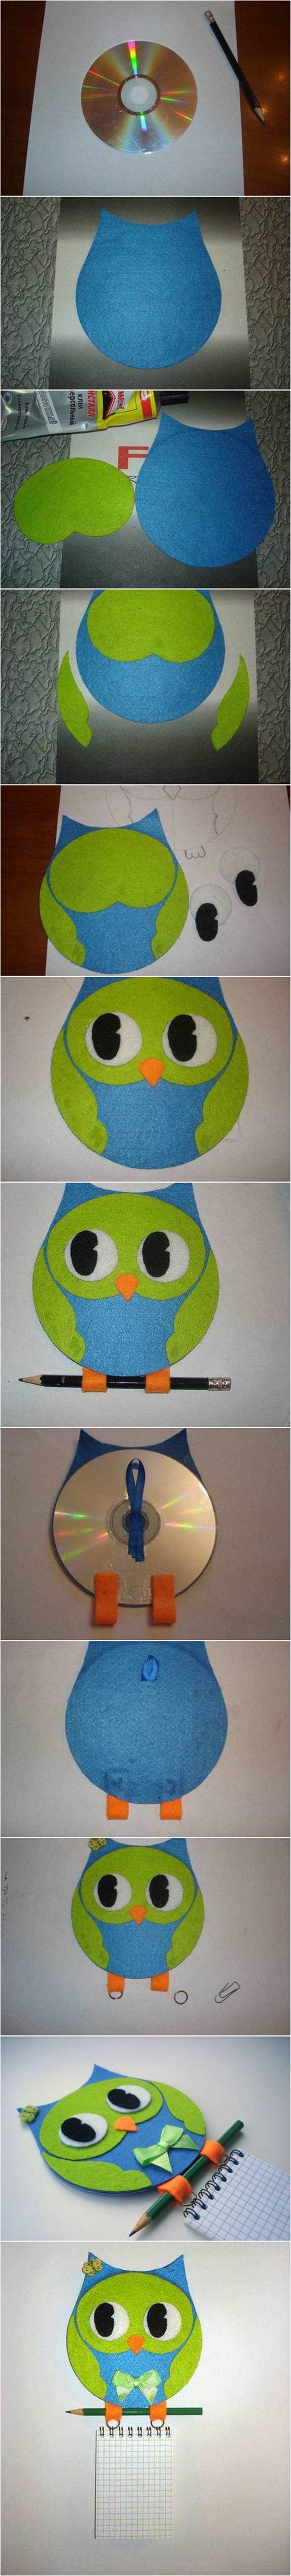 Creative Ideas - DIY Adorable Felted Owl from Old CD